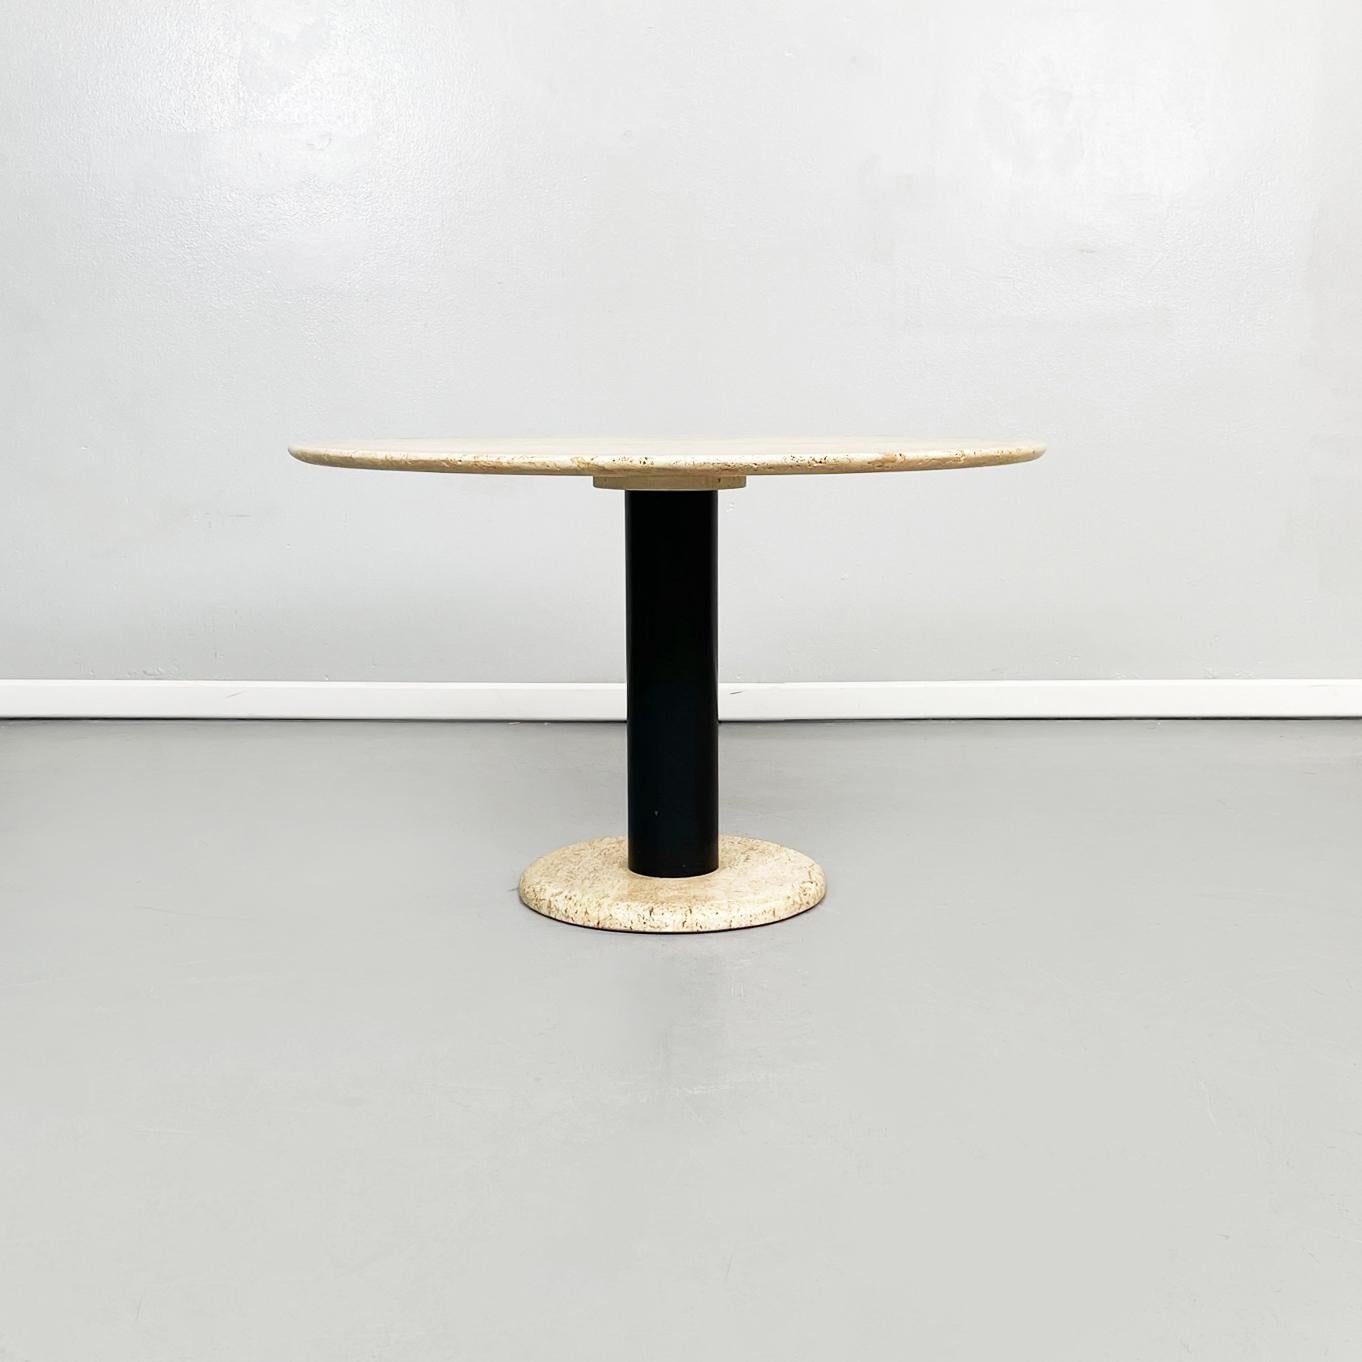 Italian mid-century Round travertine and black metal coffee table, 1970s
Round coffee table with travertine top. The top is a thin slab of travertine, resting on a cylindrical leg in black painted metal. The round base is in